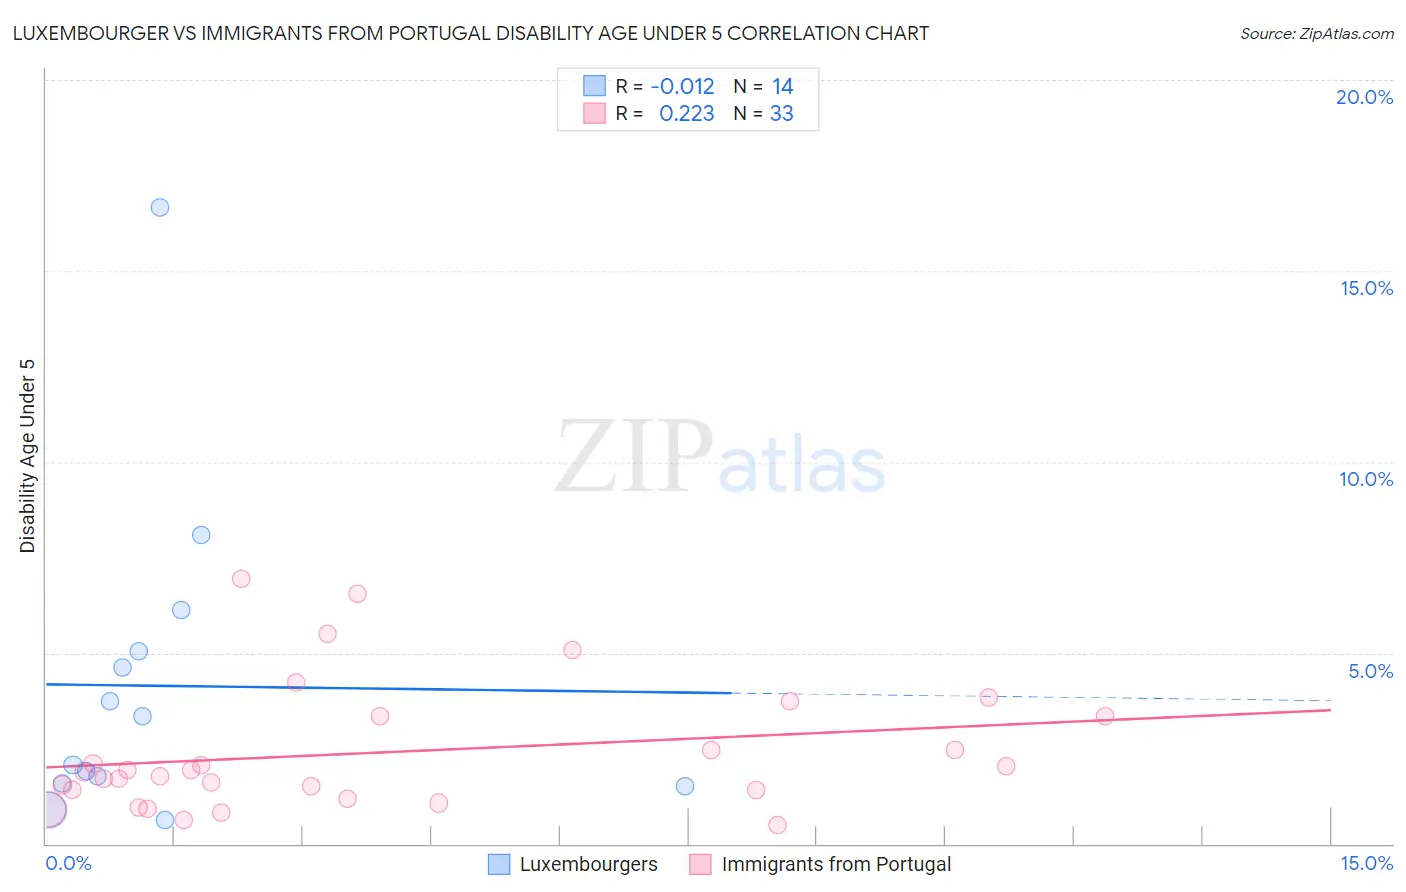 Luxembourger vs Immigrants from Portugal Disability Age Under 5